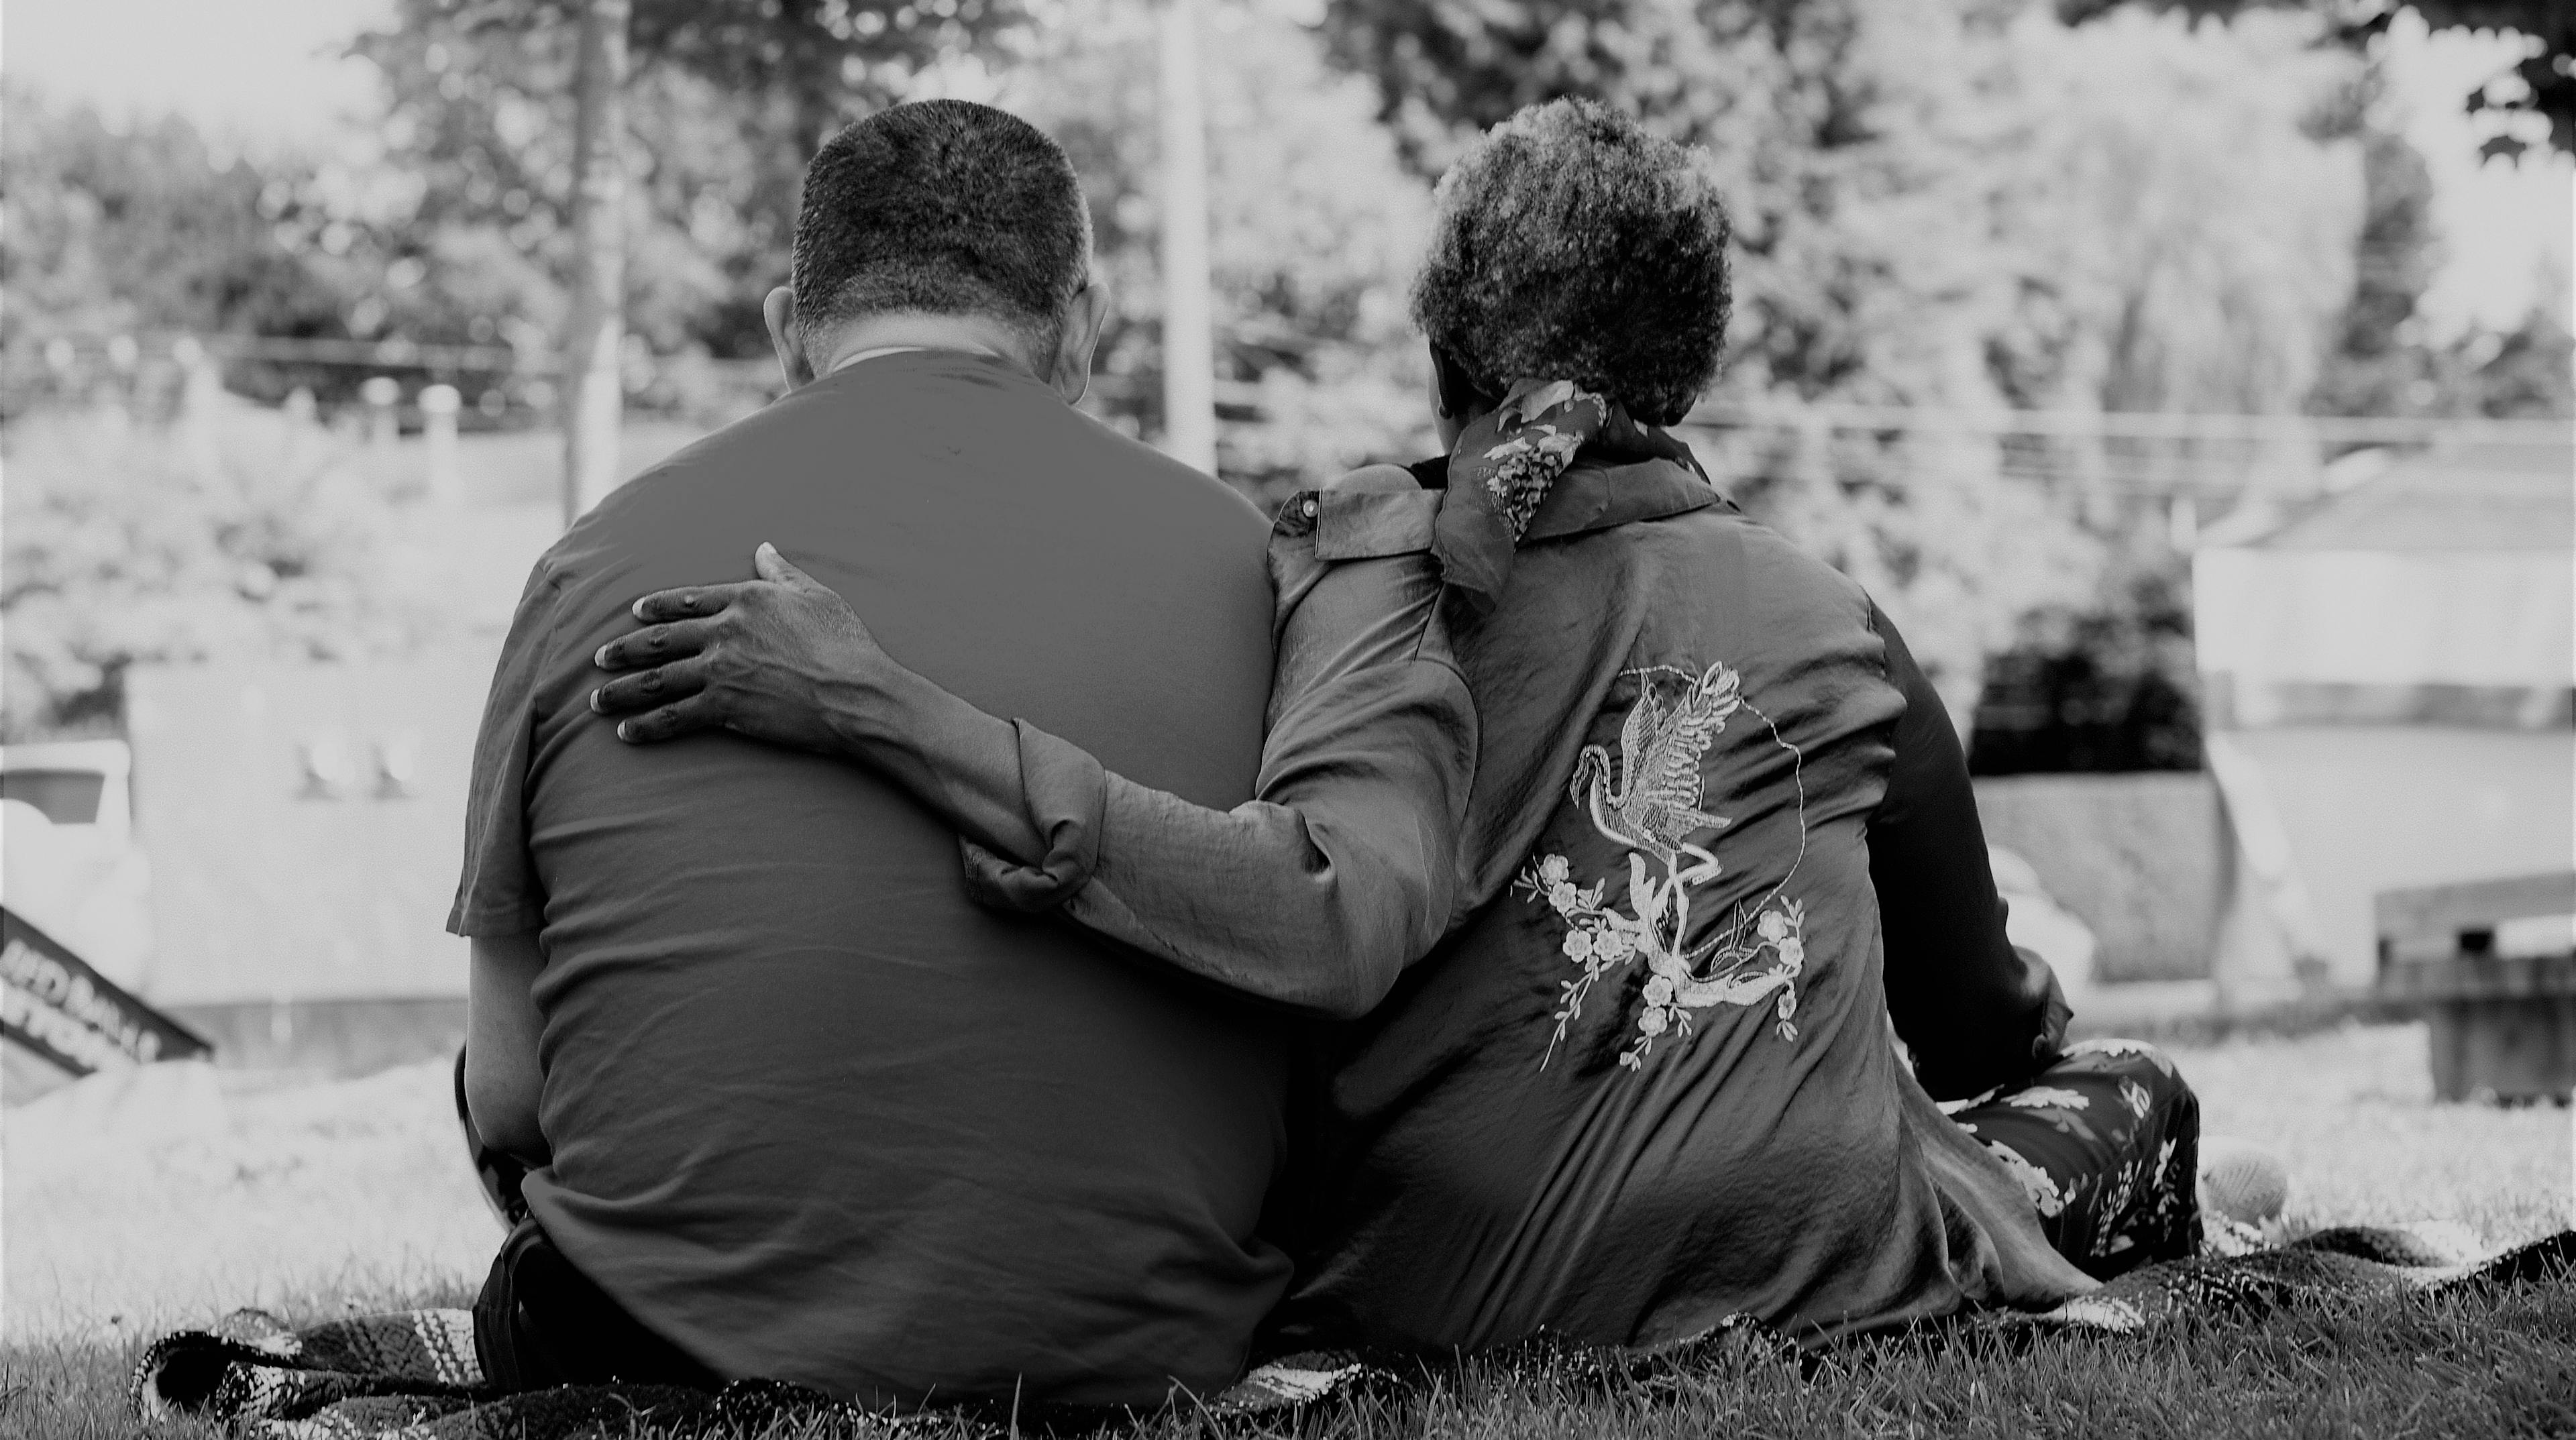 black and white picture of a man and woman sitting on a blanket in the grass with their backs to the camera and the woman's arm wrapped lovingly around the back of her partner.